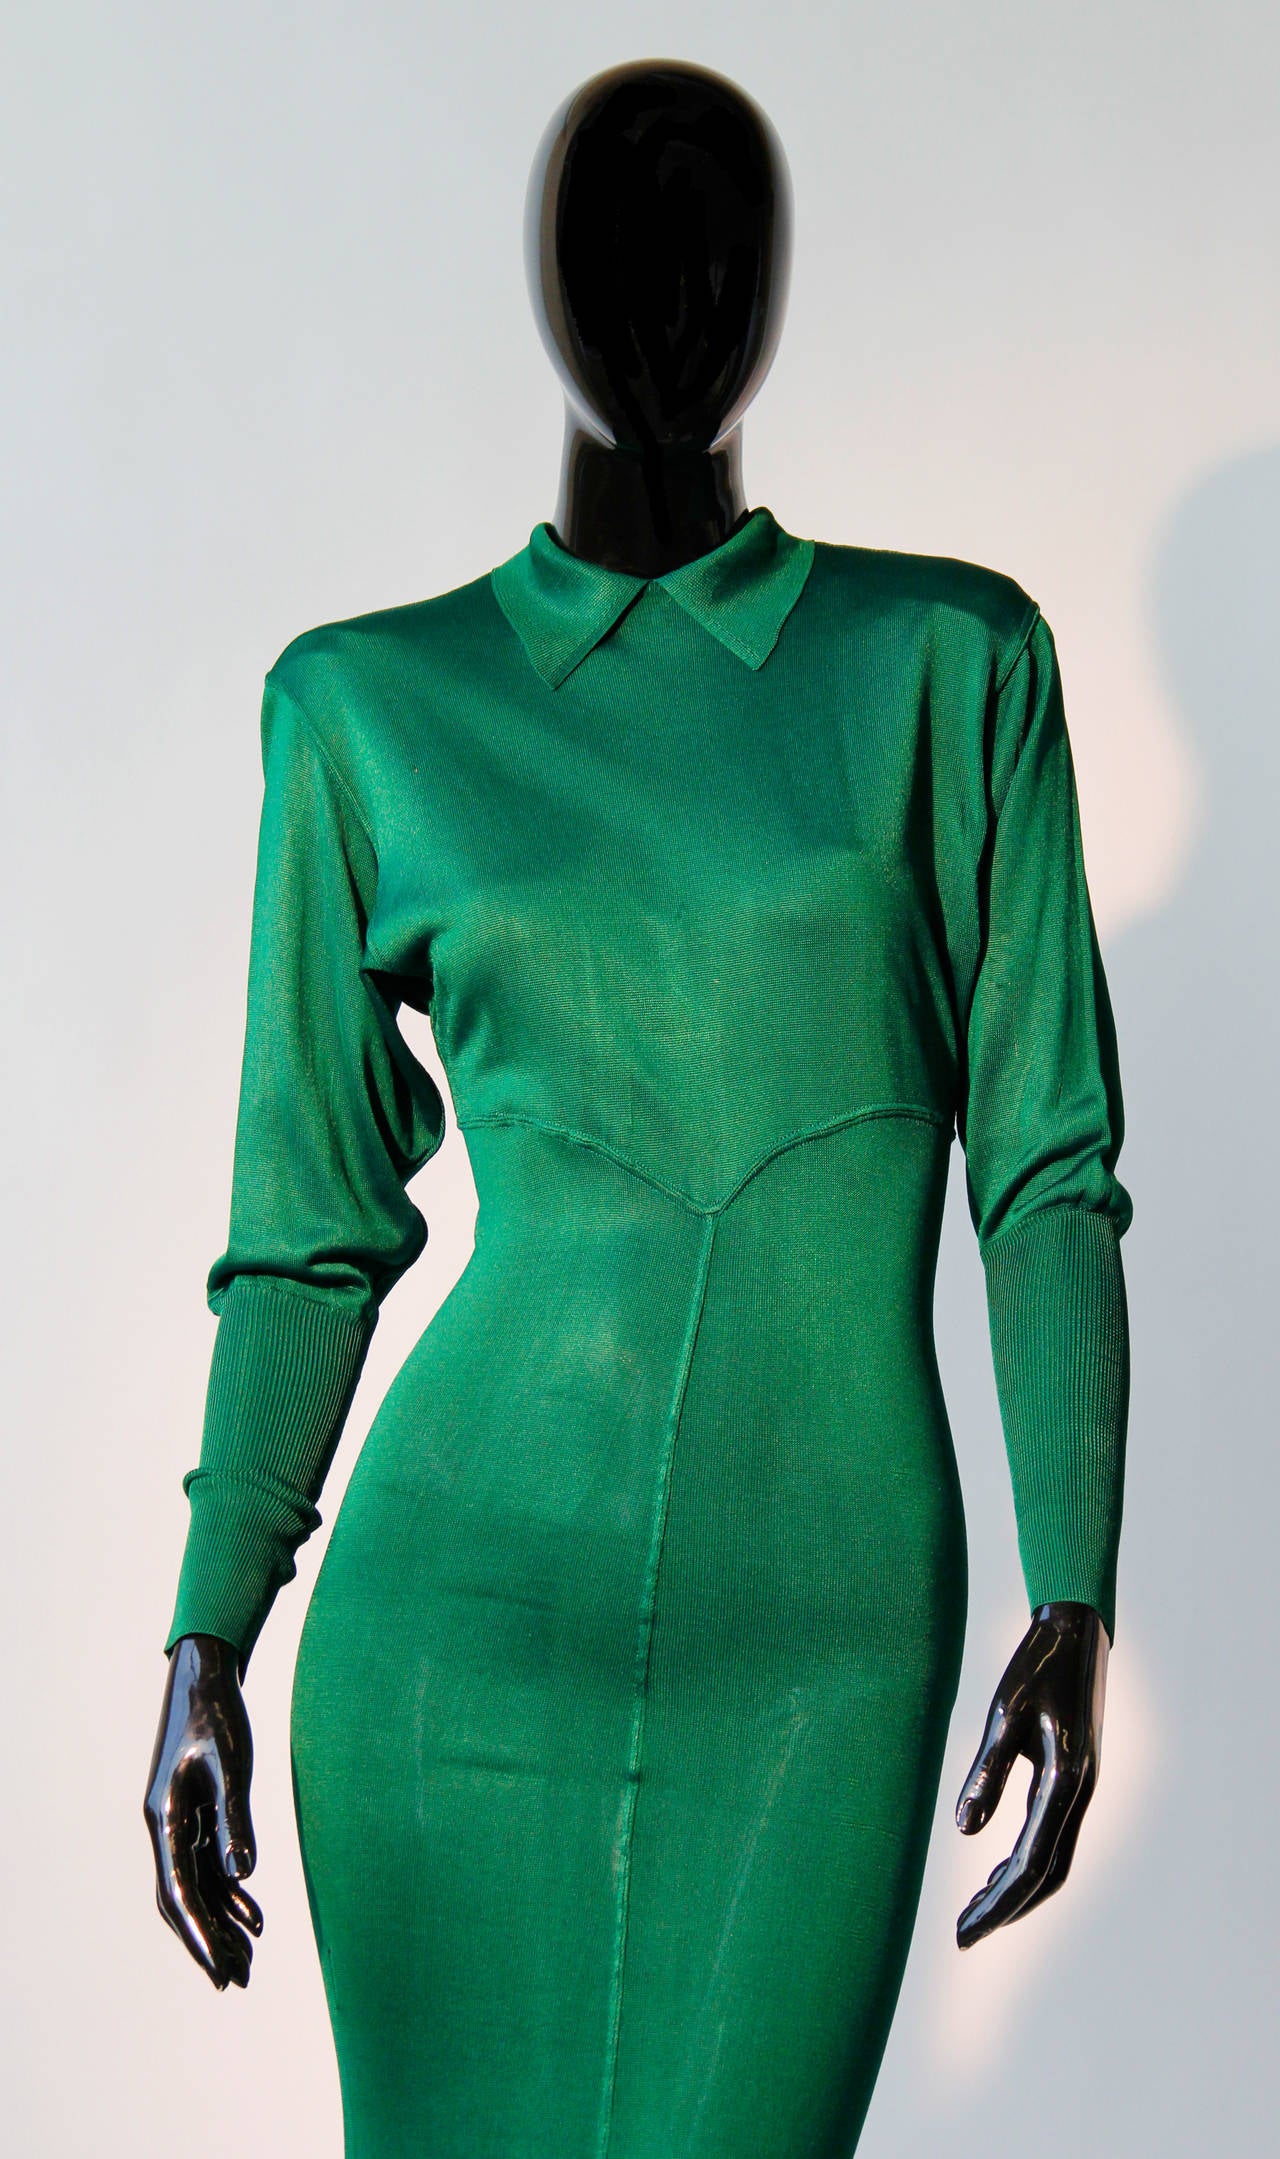 A fine and rare Alaia dress from the year 1987. The dress is in a beautiful emerald green, features a collar, open back fastening and has a unique cut which contours the female form. 

The beauty about this dress is its sex appeal, the fabric of